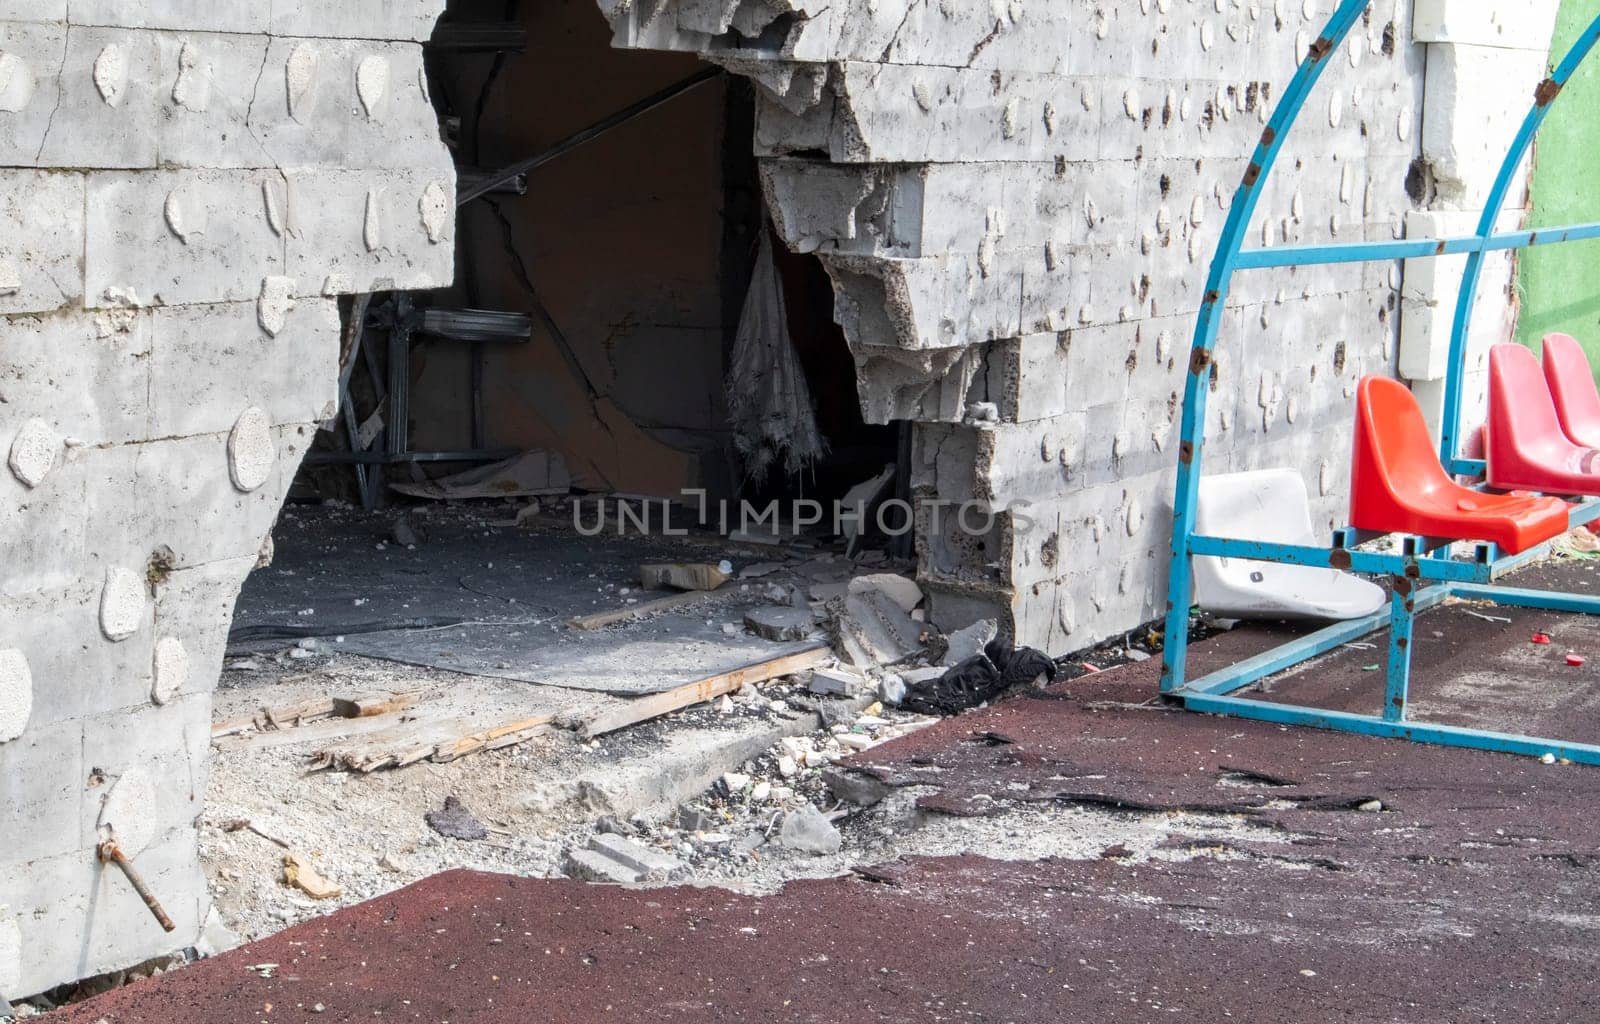 War in Ukraine. Exploded football stadium as a result of rocket attack. Broken benches for fans in the stands. Destroyed stands of the stadium. Broken fan seats